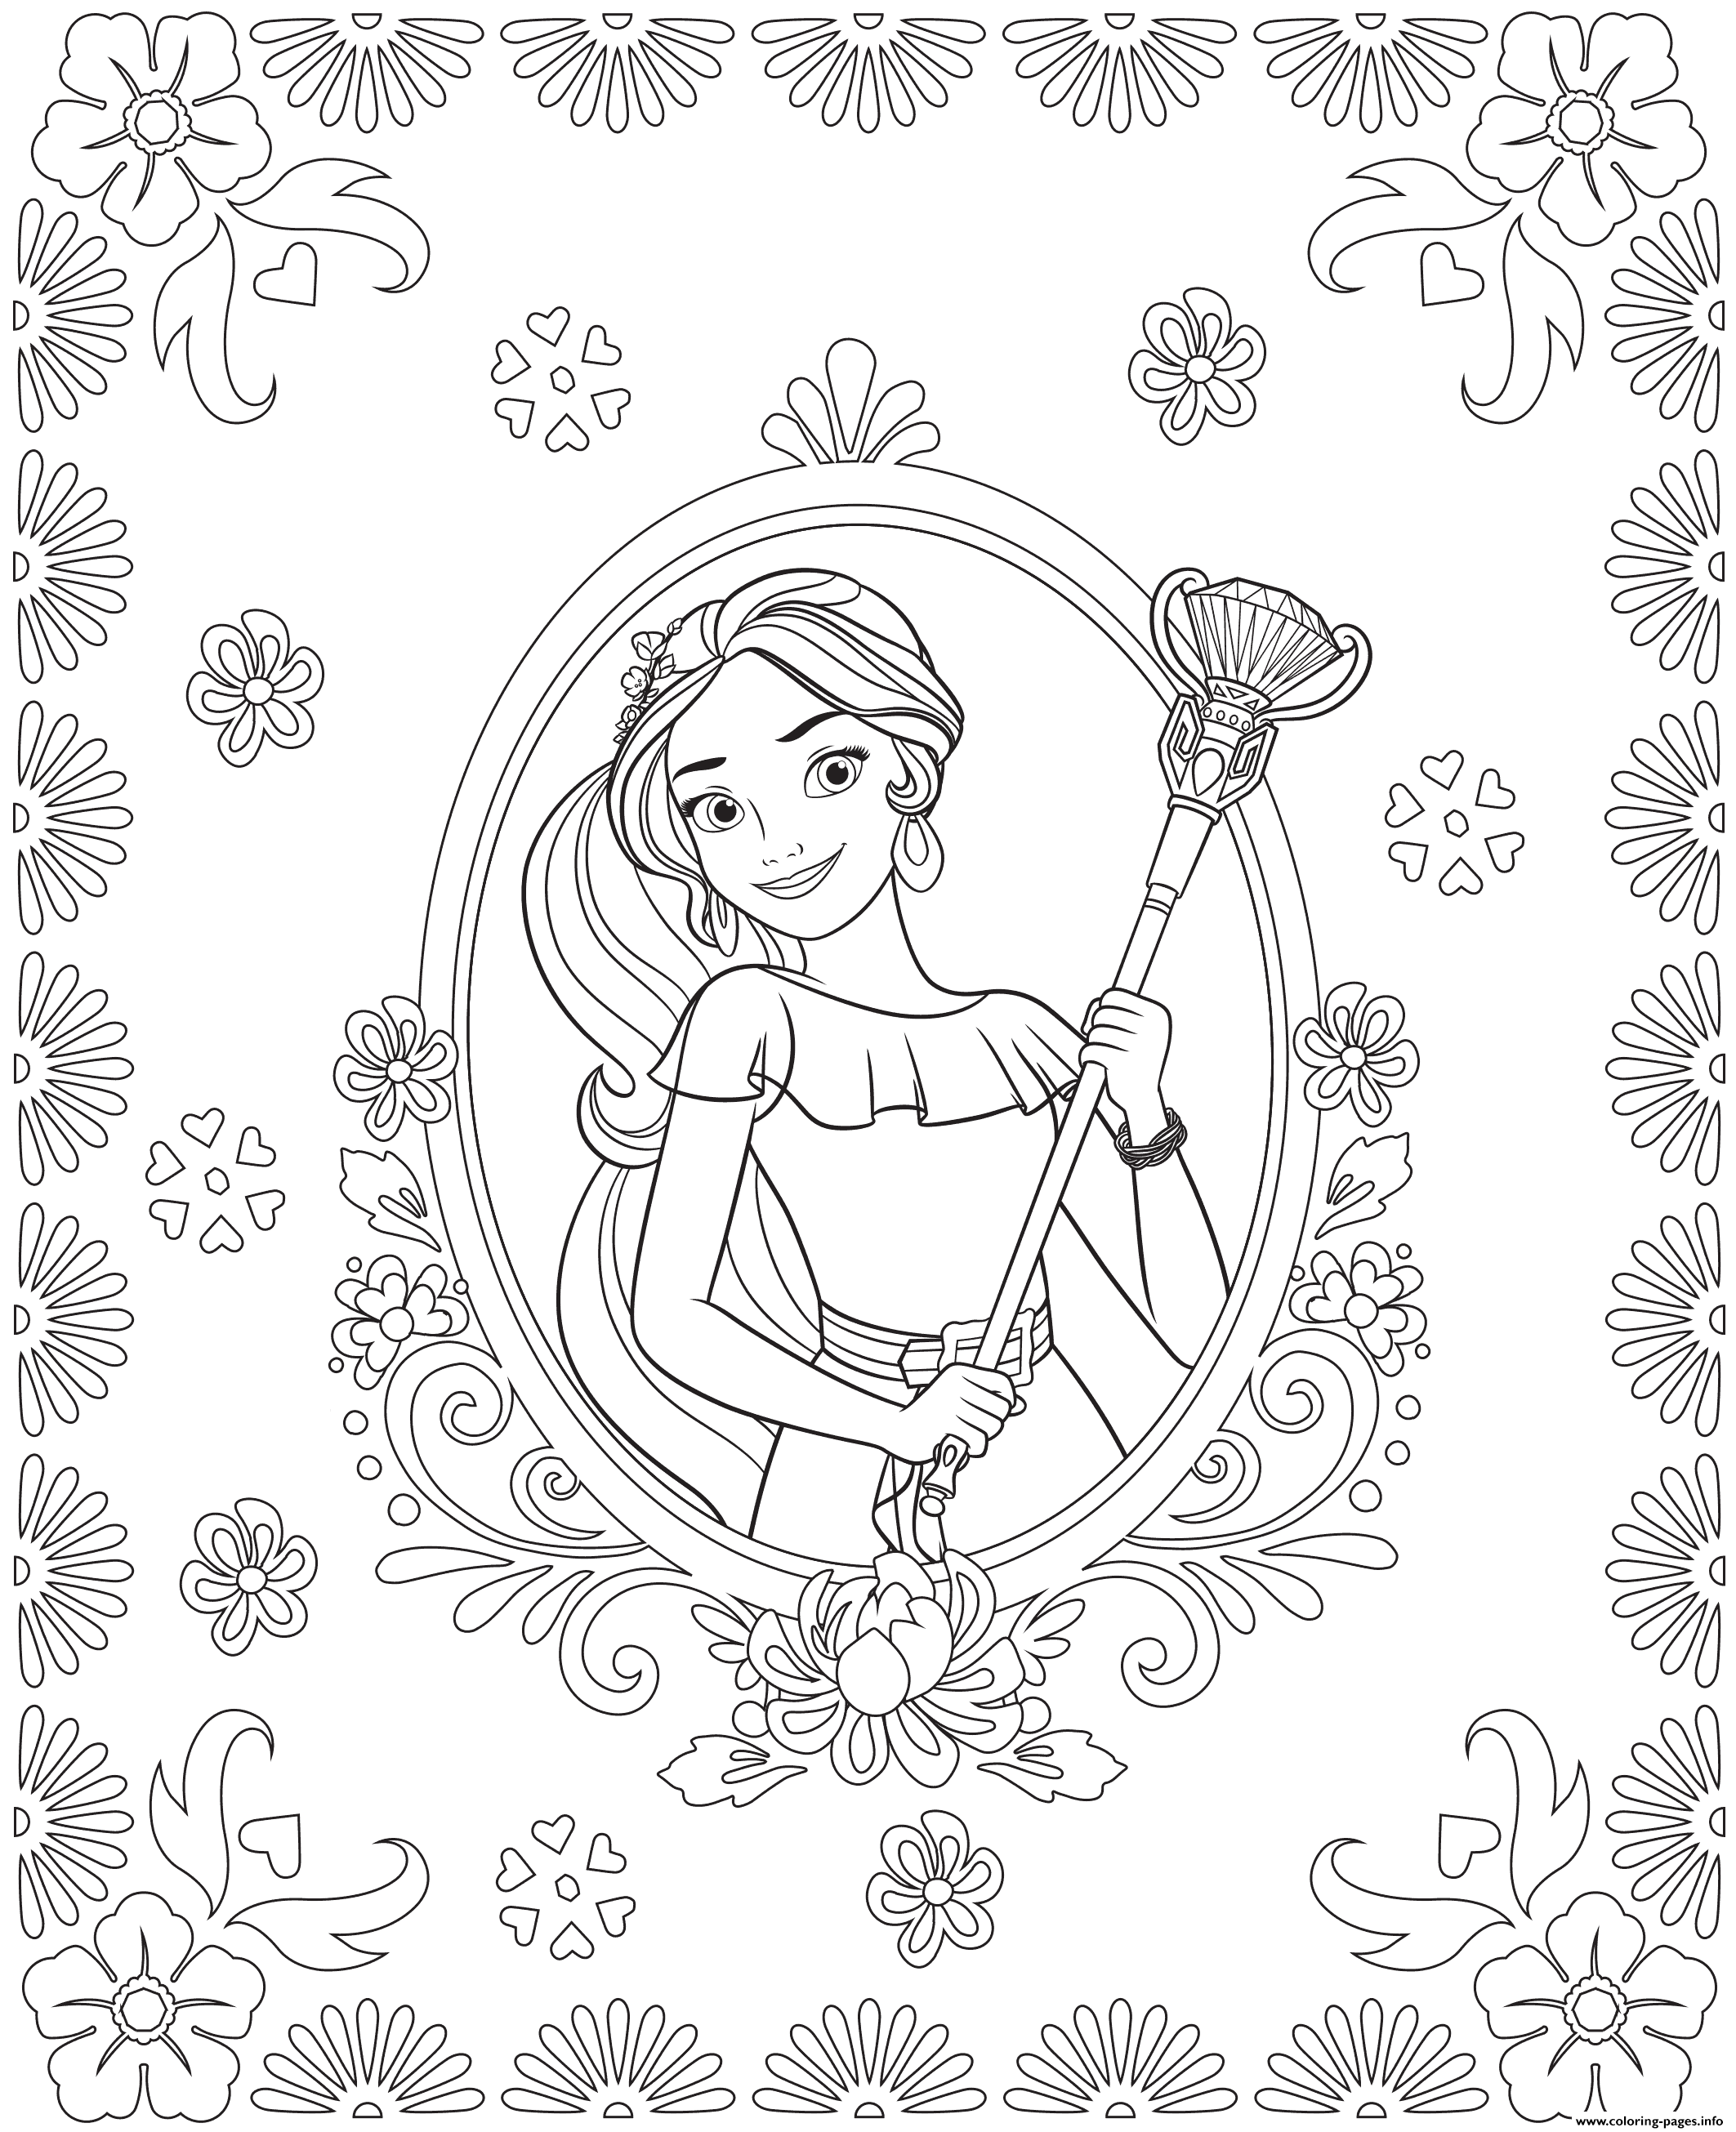 elena-of-avalor-colouring-page-coloring-pages-printable